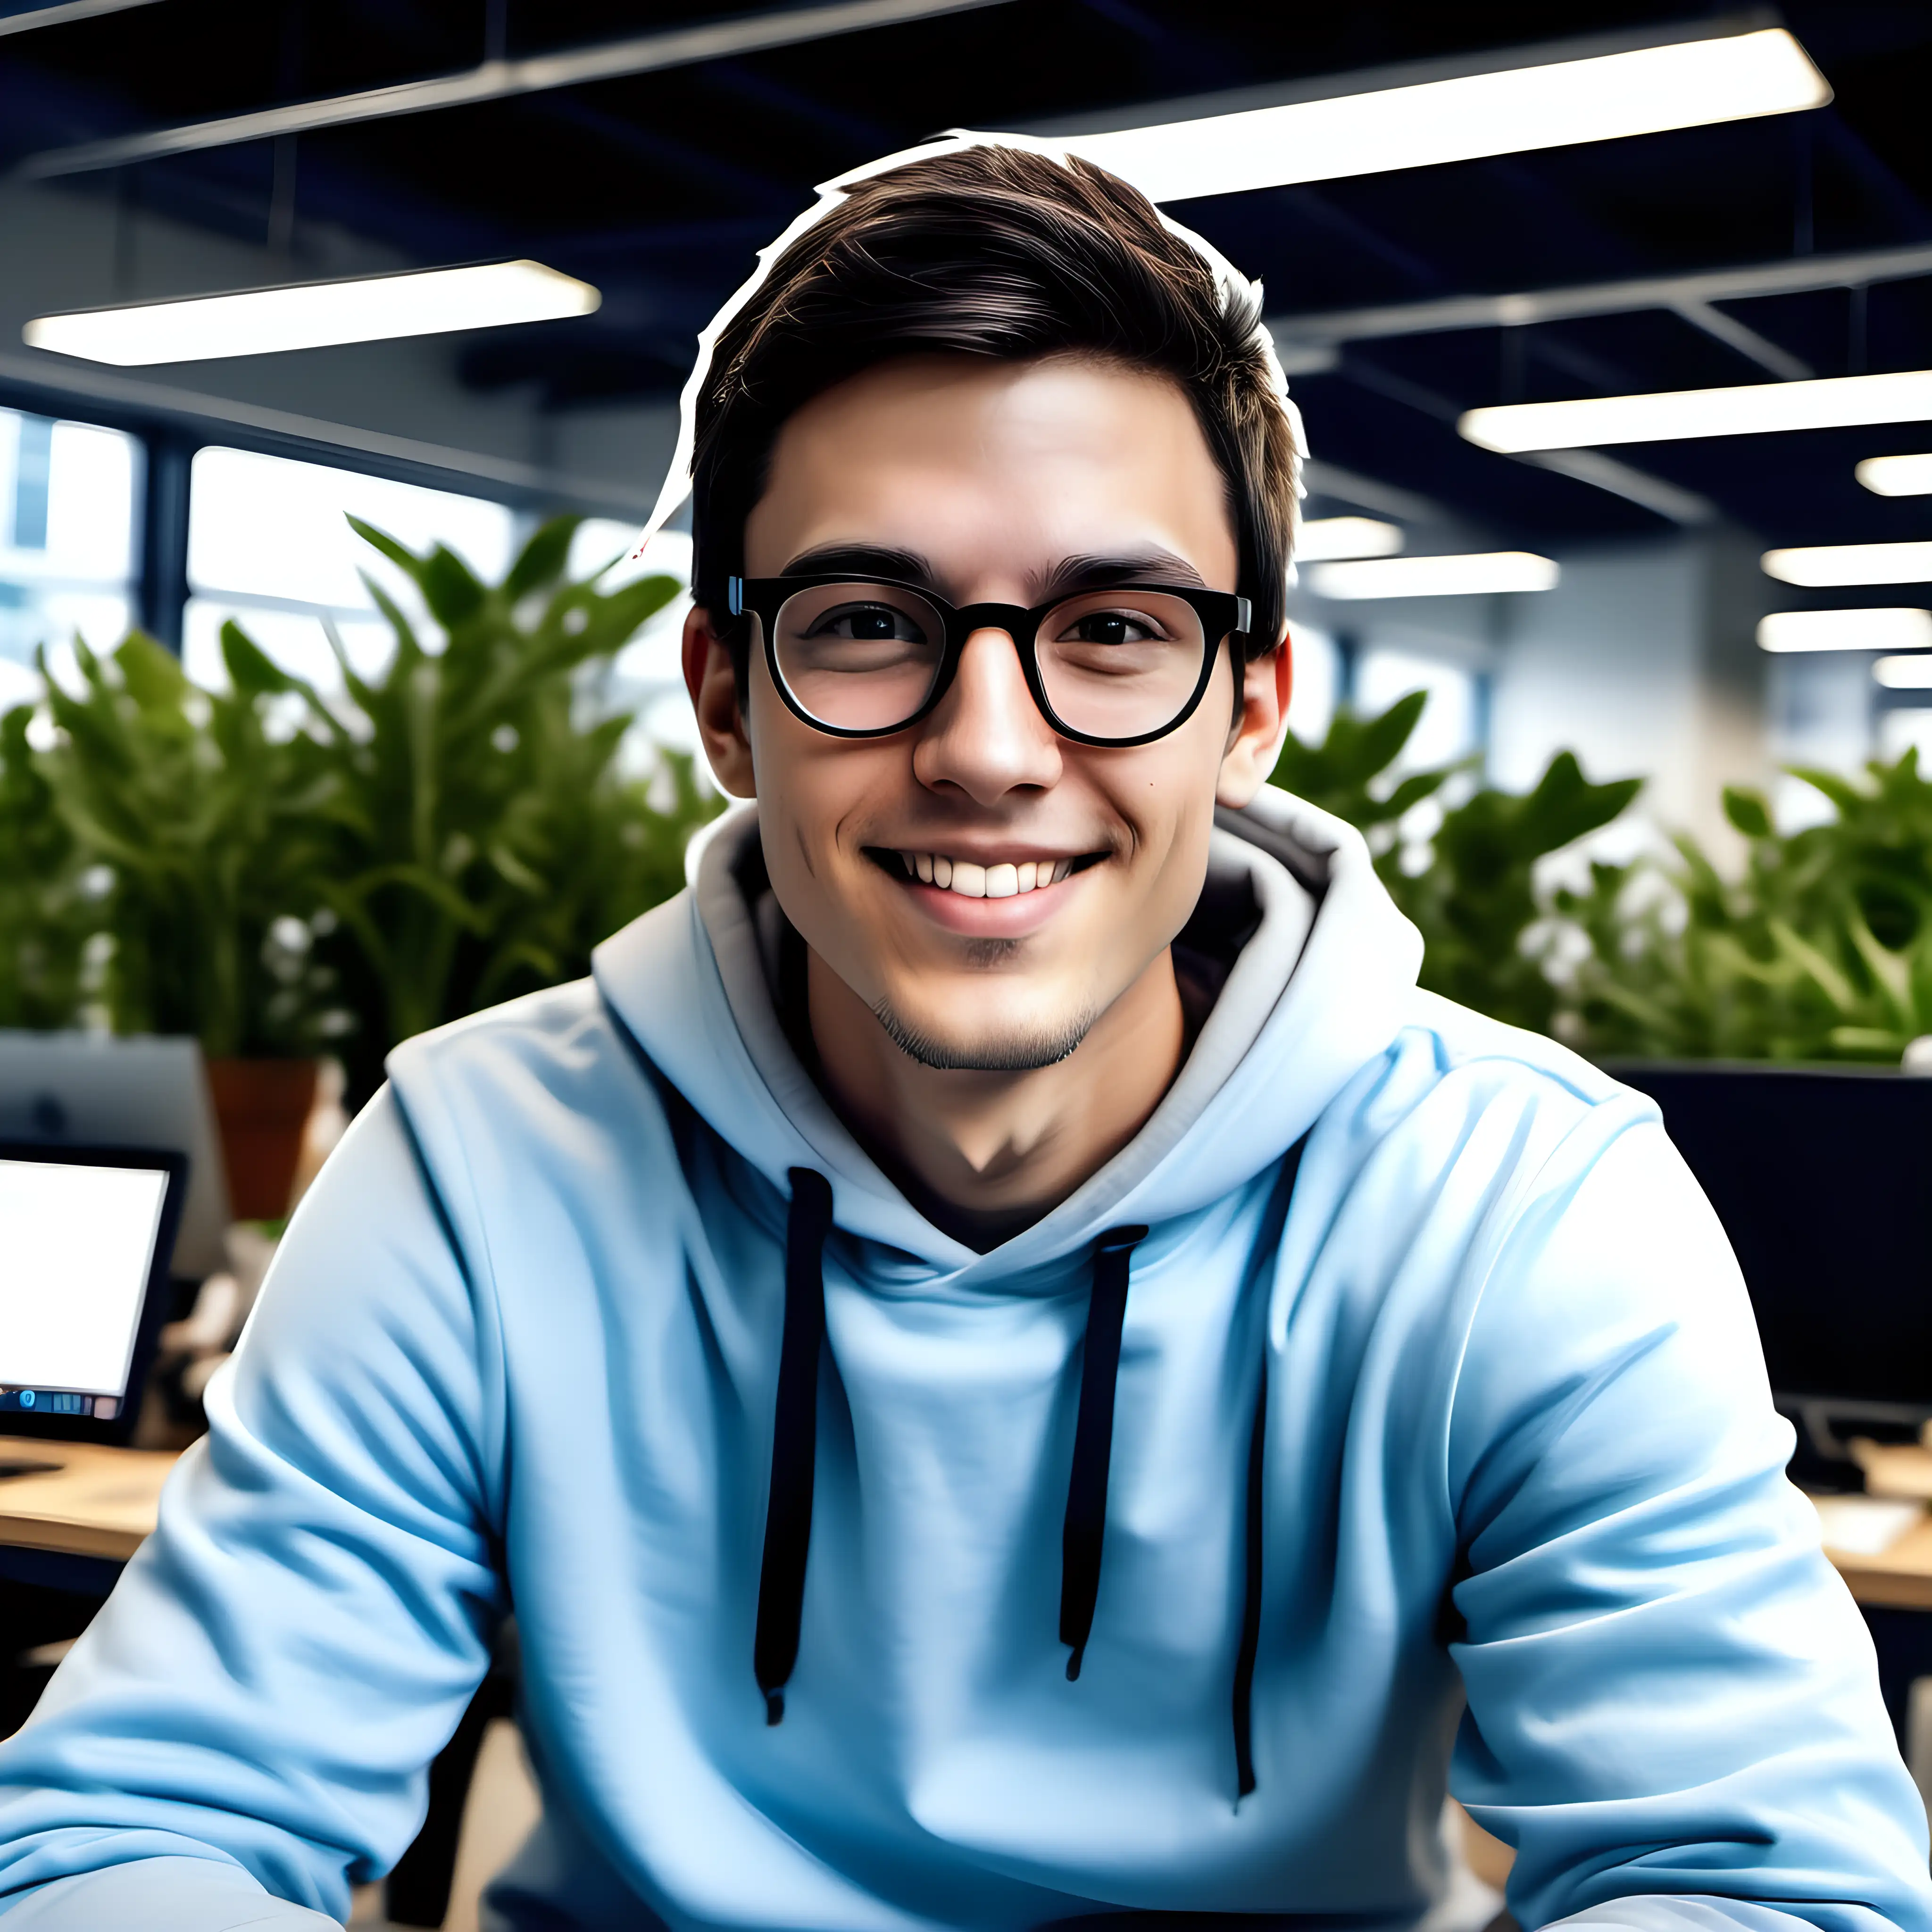 [boyish slim male] avatar sitting at down, [medium length dark brown hair, clean shaven] [wearing round black wire frame reading glasses and light blue hoodie] [enthusiastic, happy and helpful], [new junior employee whose starting at a new tech startup], modern office background with desks, plants realistic.